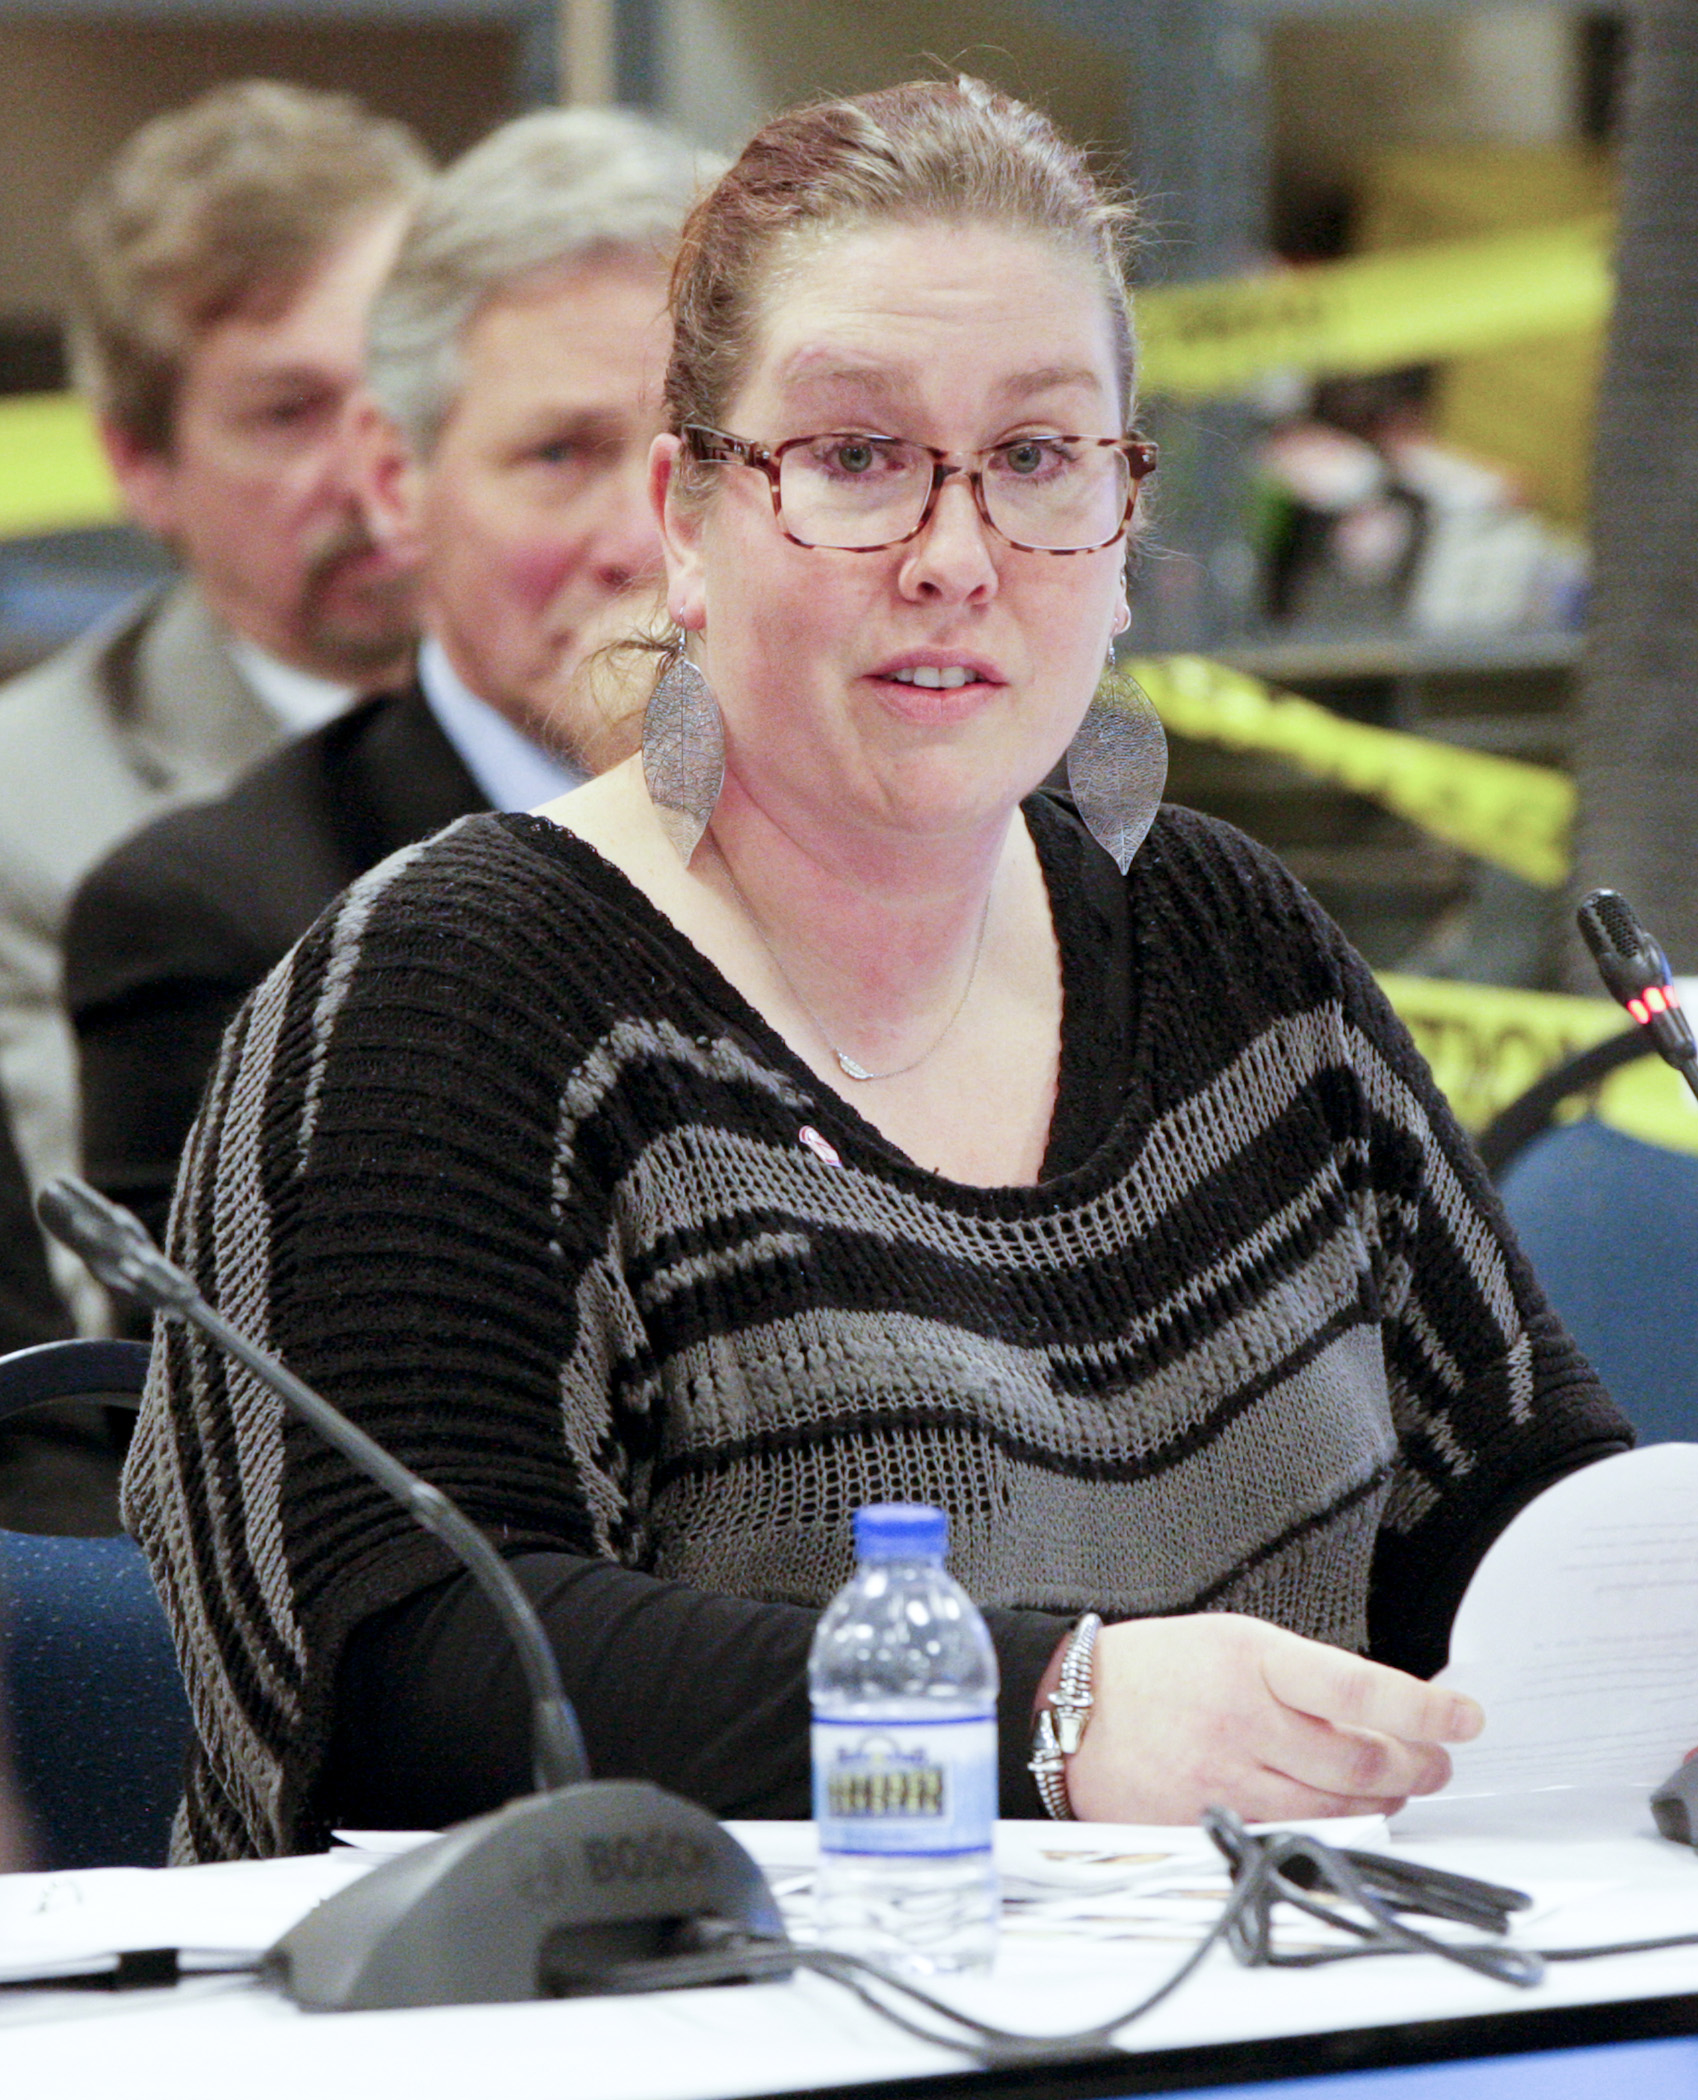 Normandale Community College student Heather Christopher tells members of the House Higher Education Policy and Finance Committee her personal story during a committee hearing held at Saint Paul College Jan. 21. Photo by Paul Battaglia